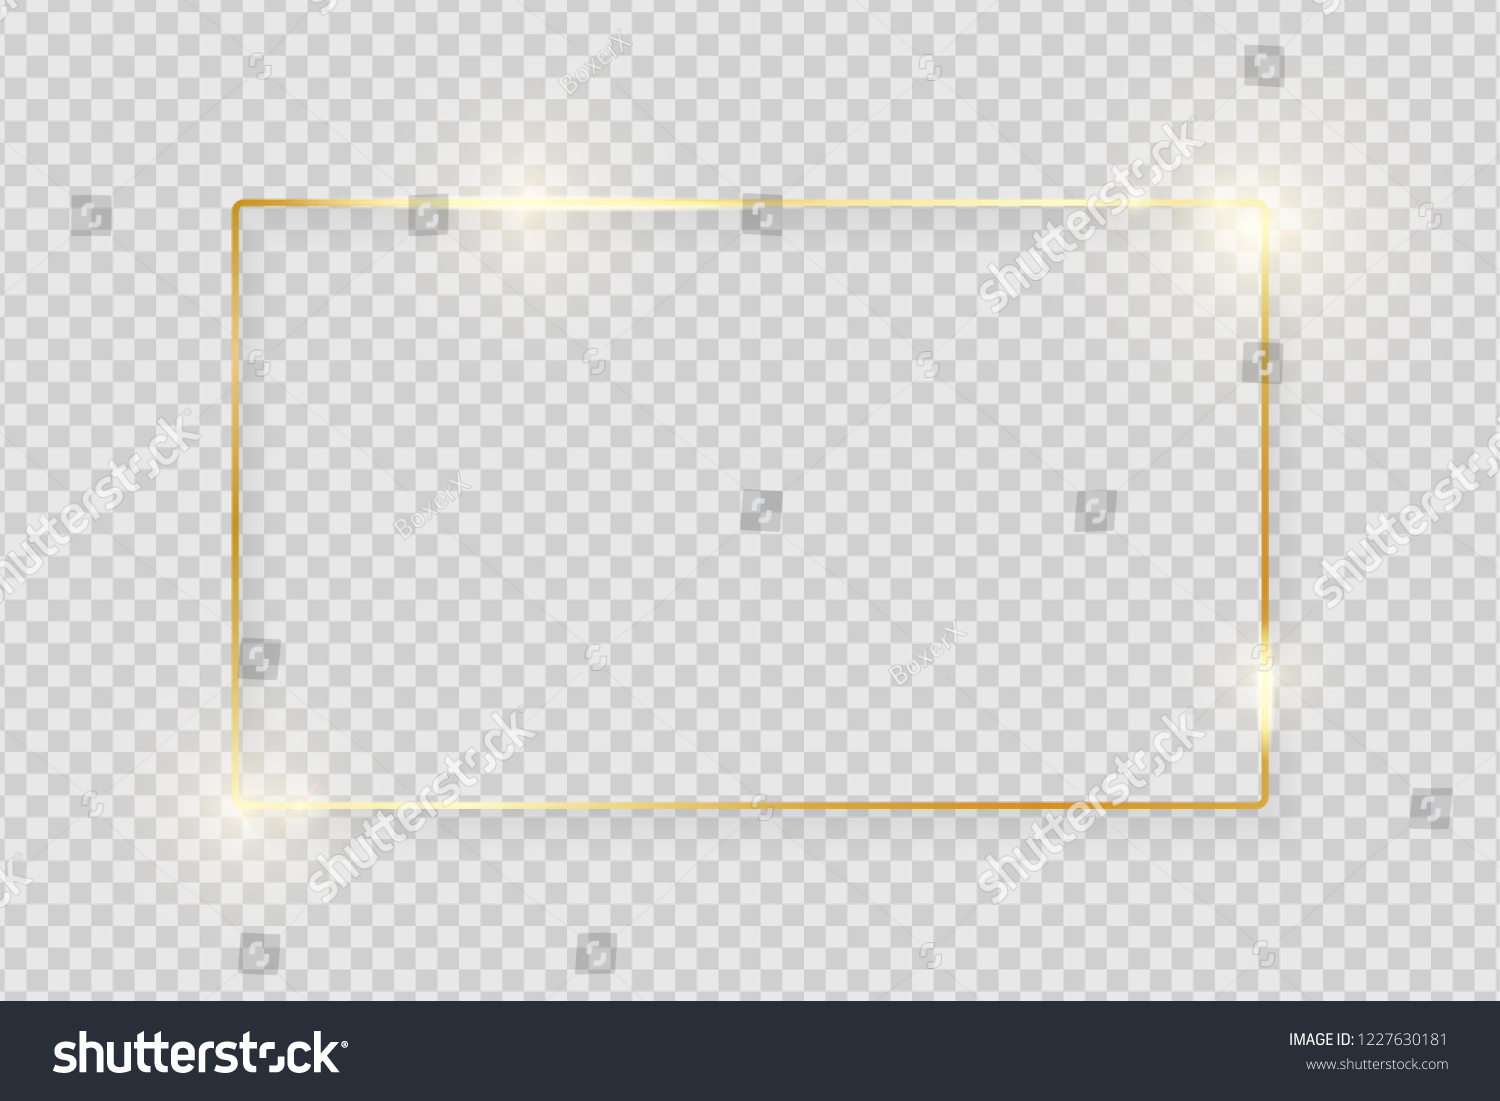 Gold shiny glowing vintage frame with shadows isolated on transparent background. Golden luxury realistic rectangle border. Vector illustration #1227630181